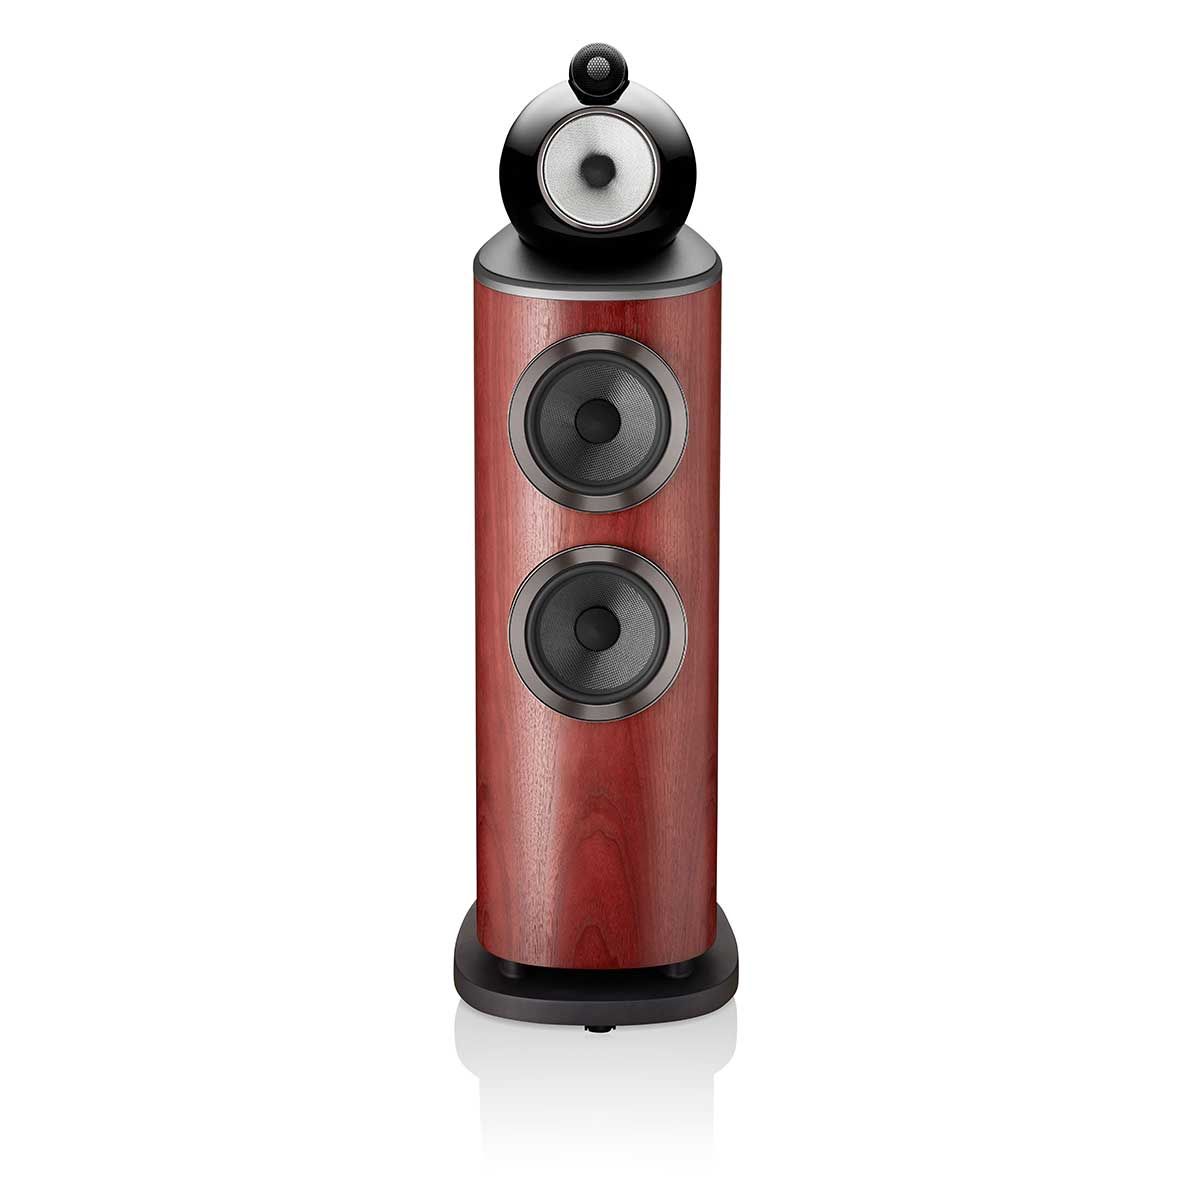 Bowers & Wilkins 803 D4 Floorstanding Speaker, Satin Rosenut, front view without grille